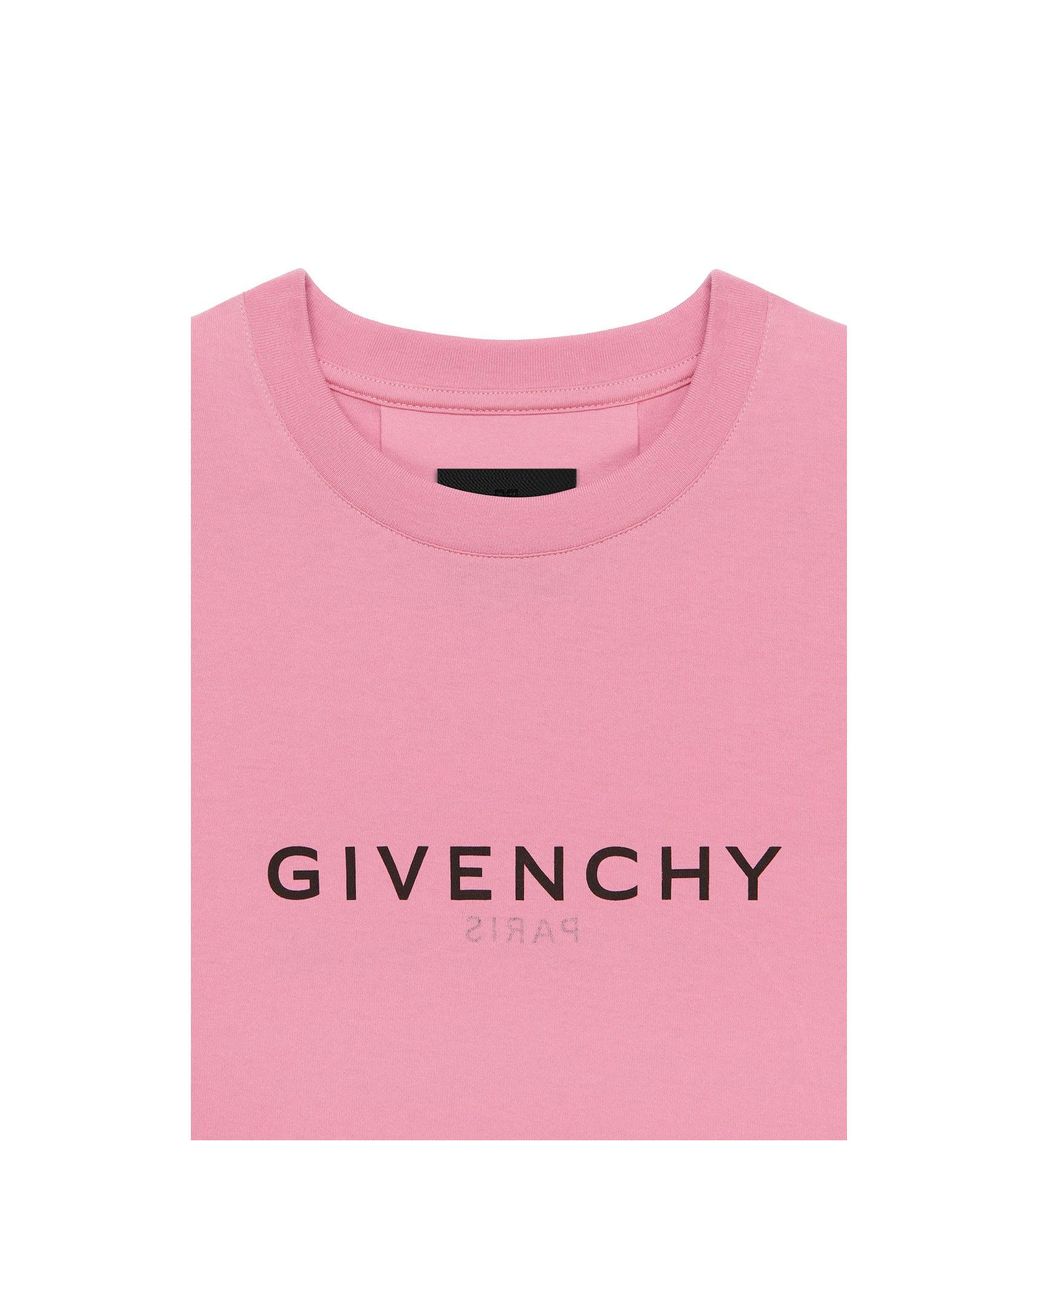 Givenchy Logo T-shirt in Pink | Lyst